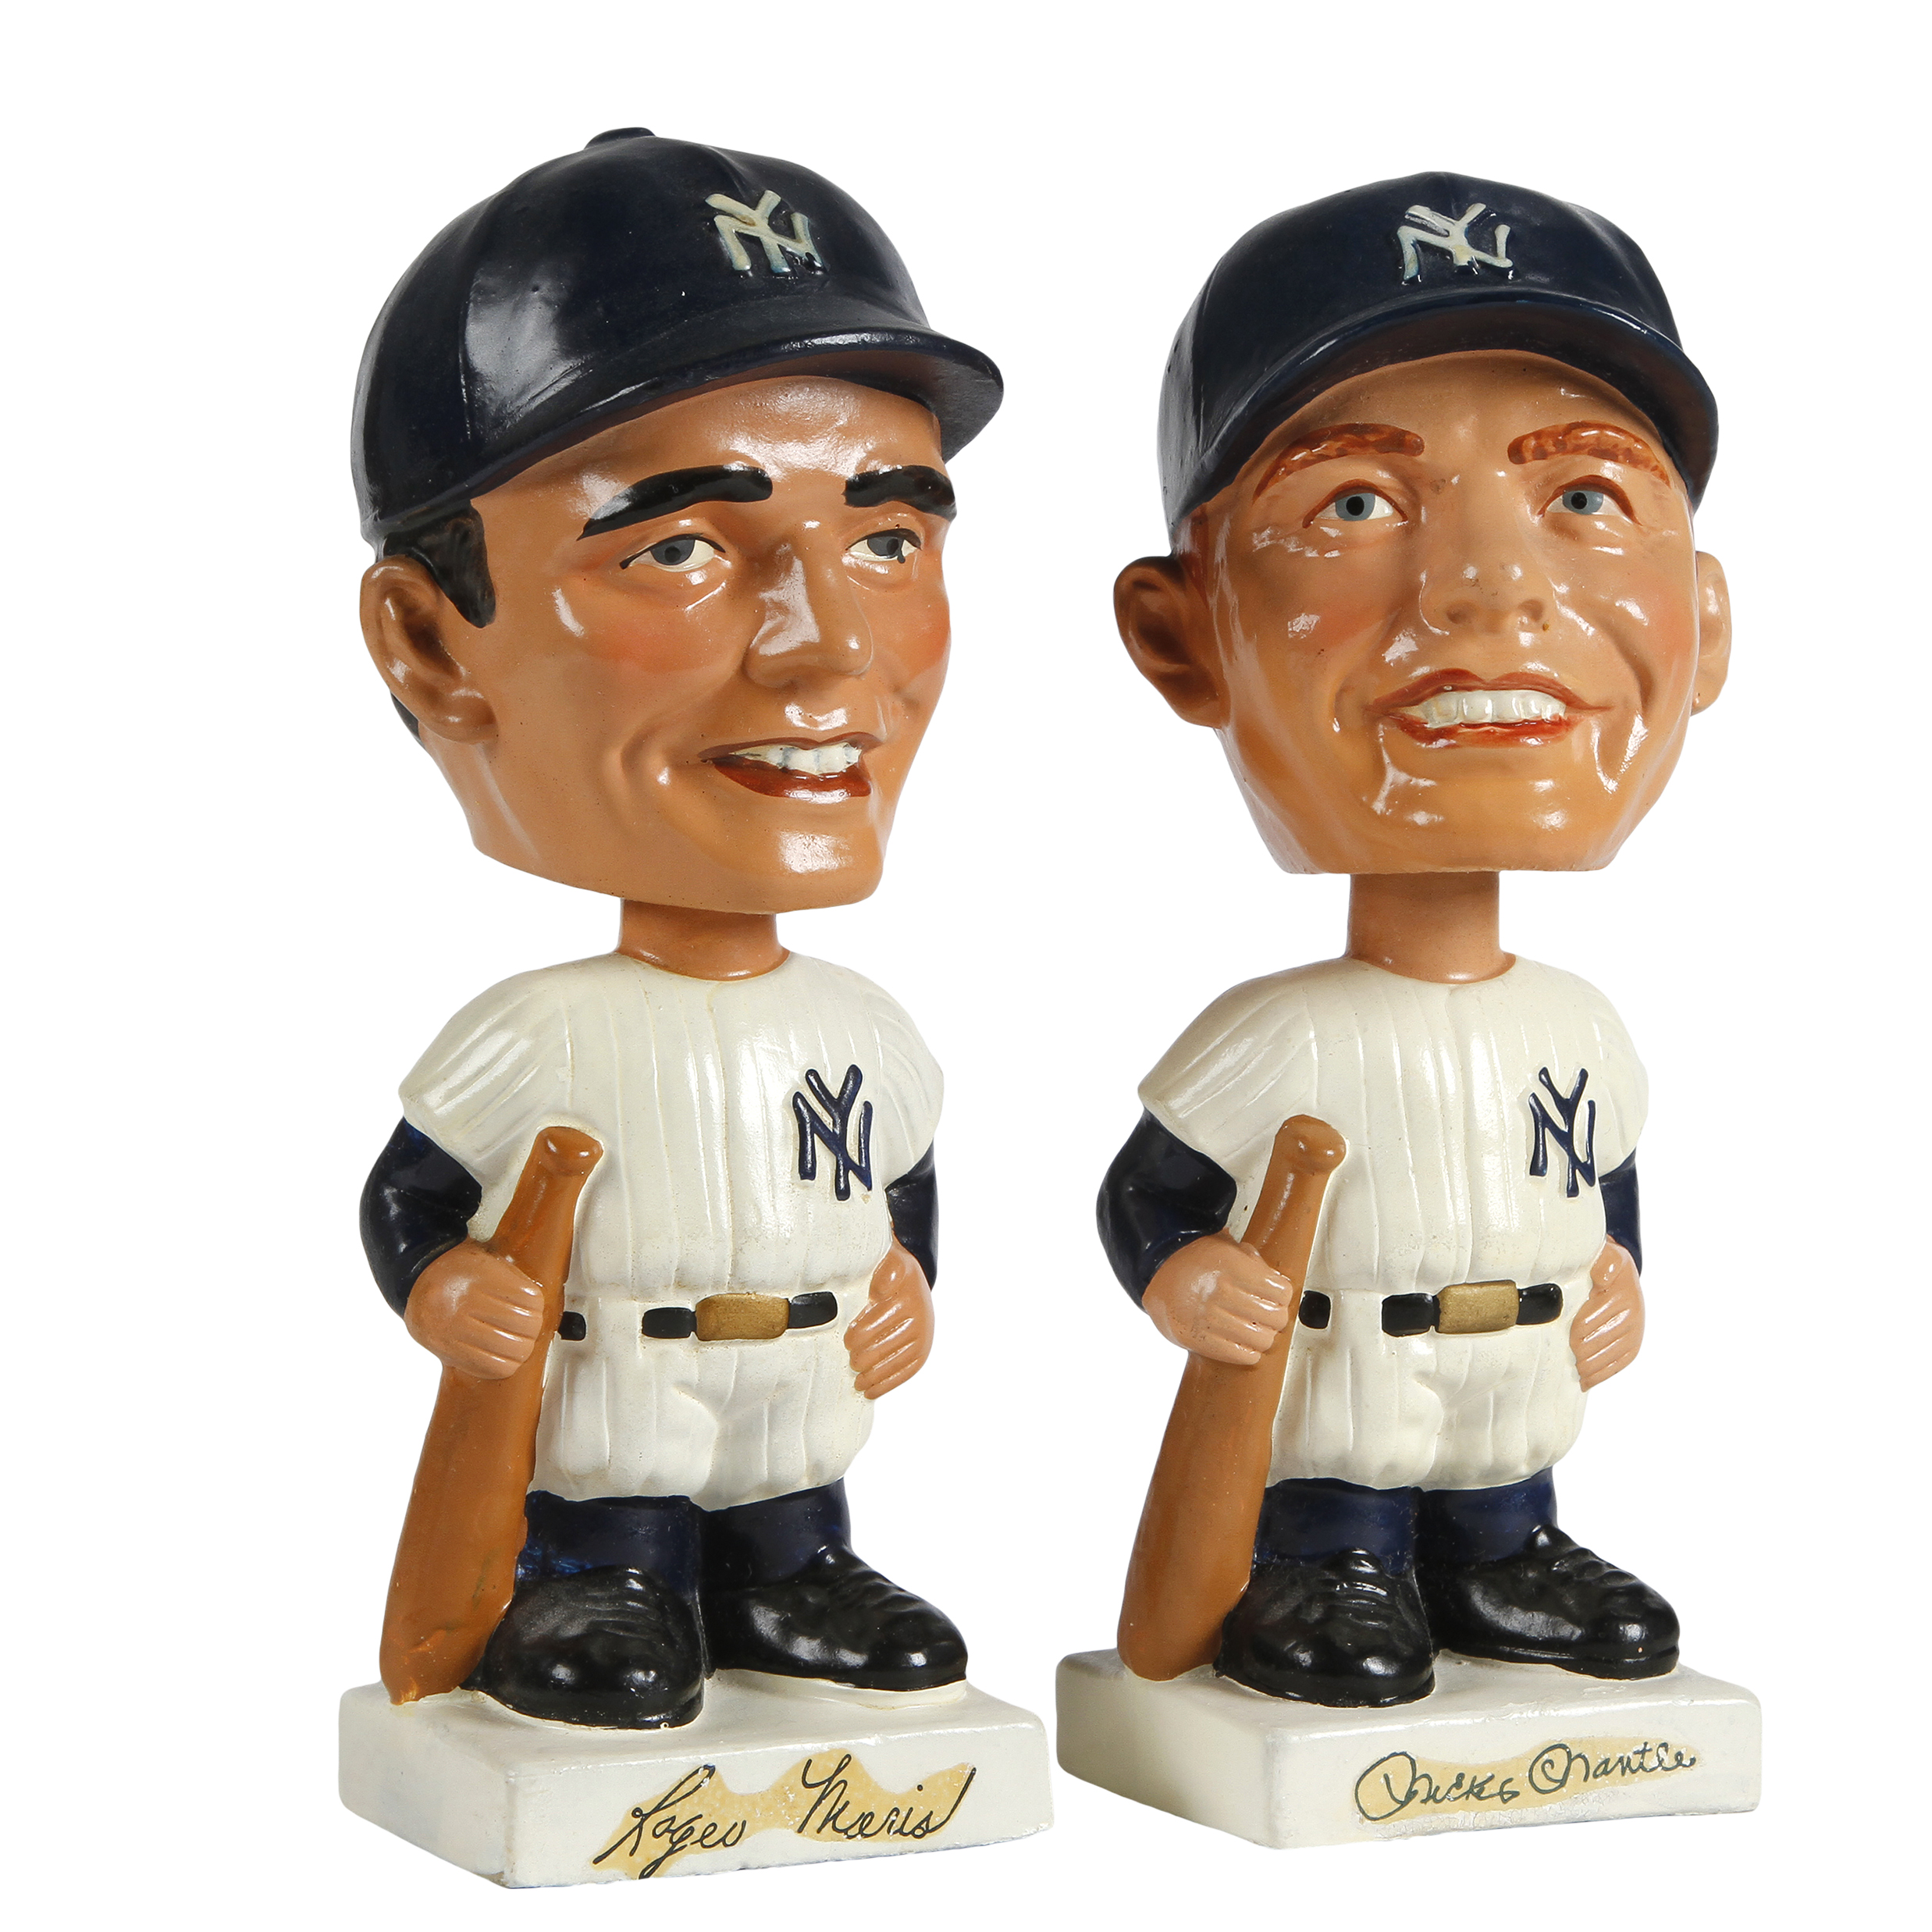 Pair of Mickey Mantle and Roger Maris 1960s Vintage BobbleHeads.